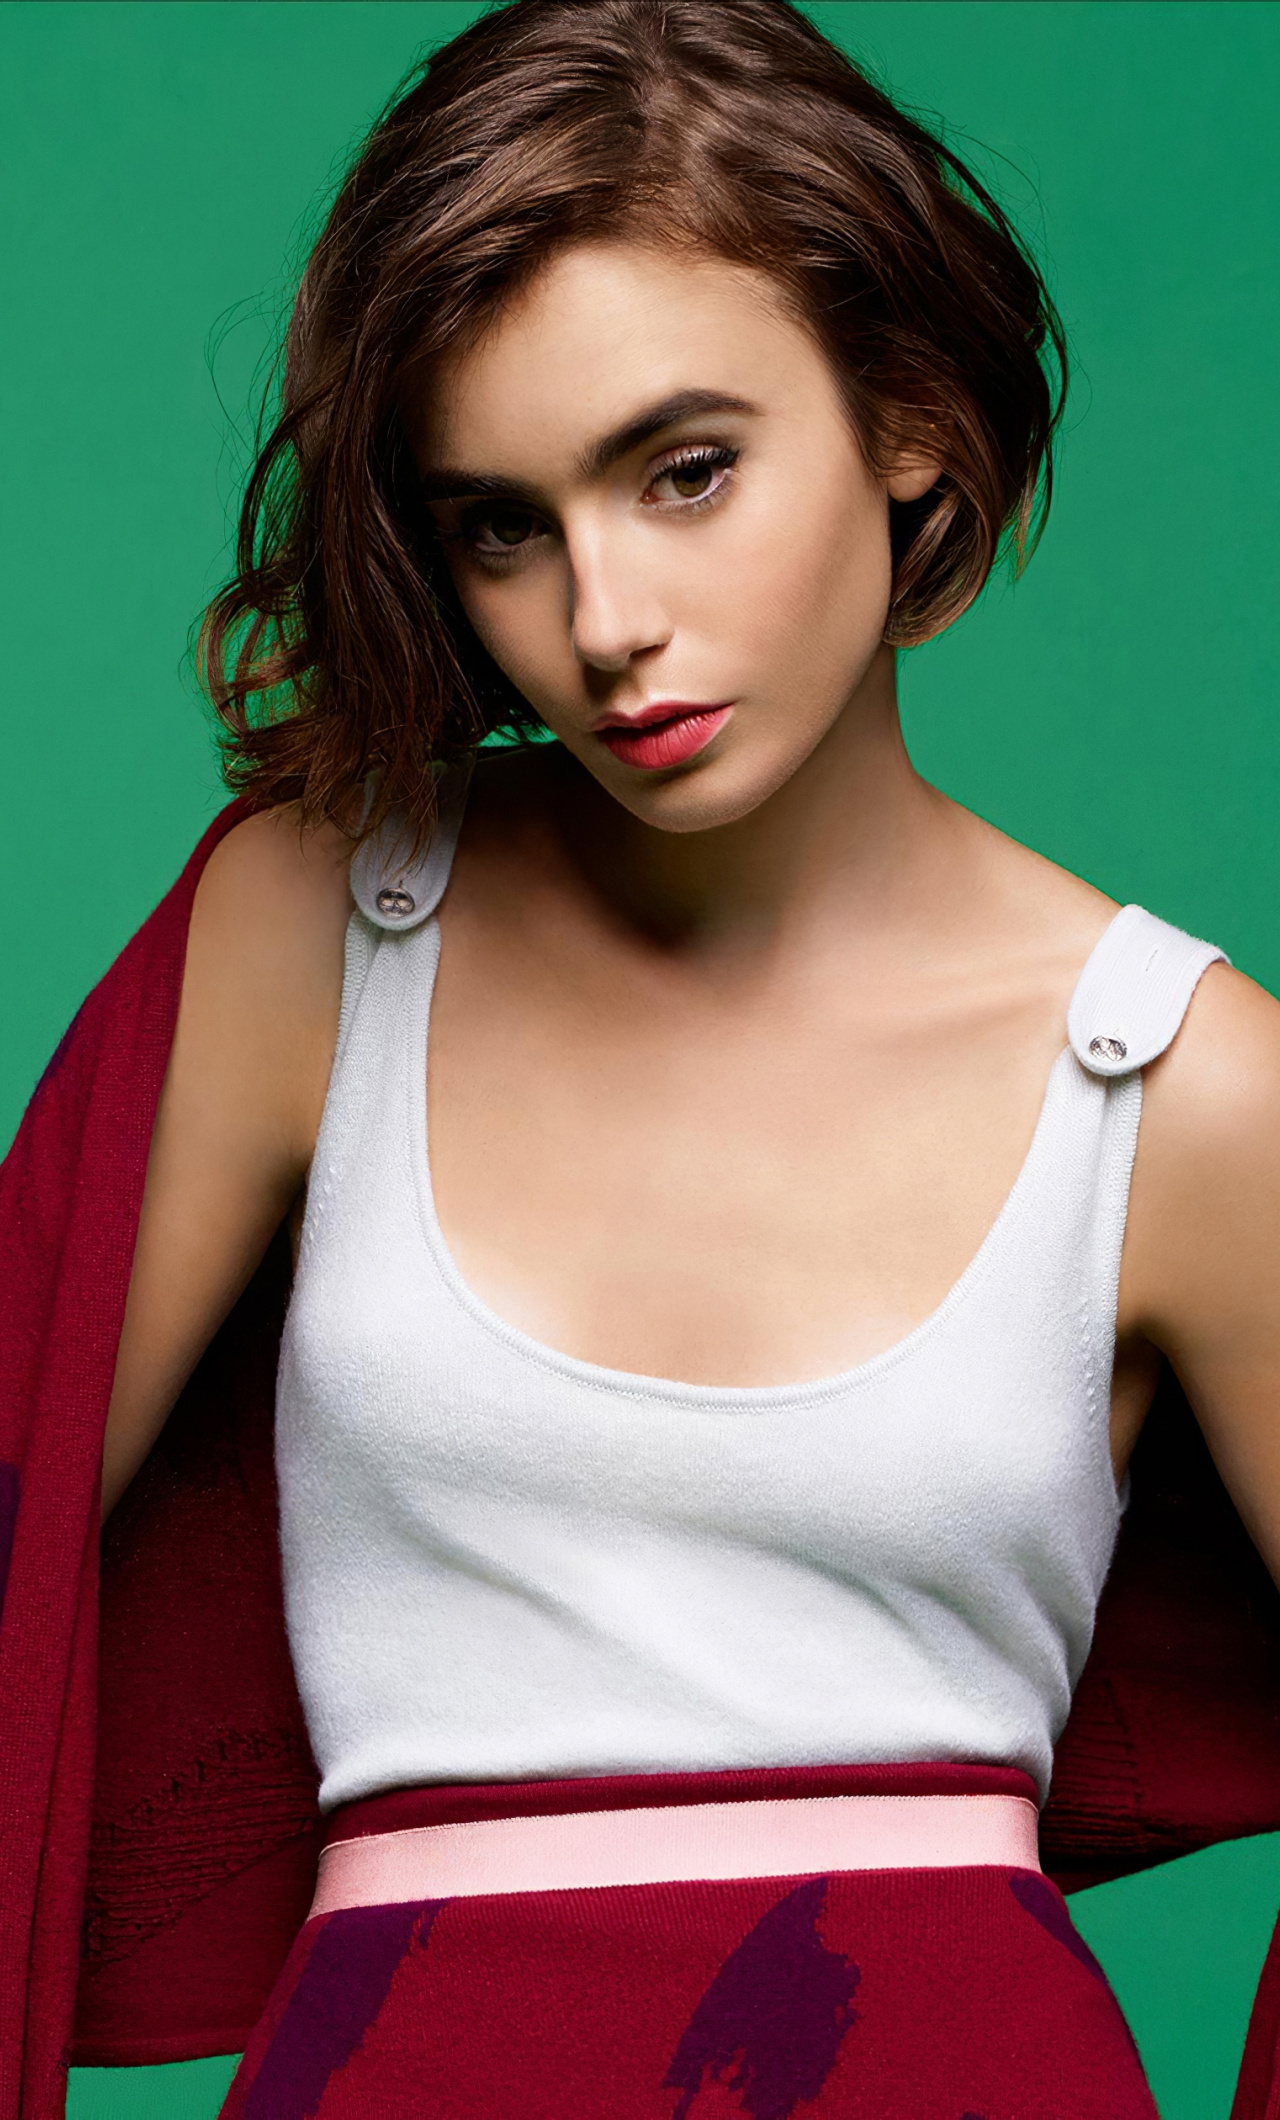 Lily collins hot